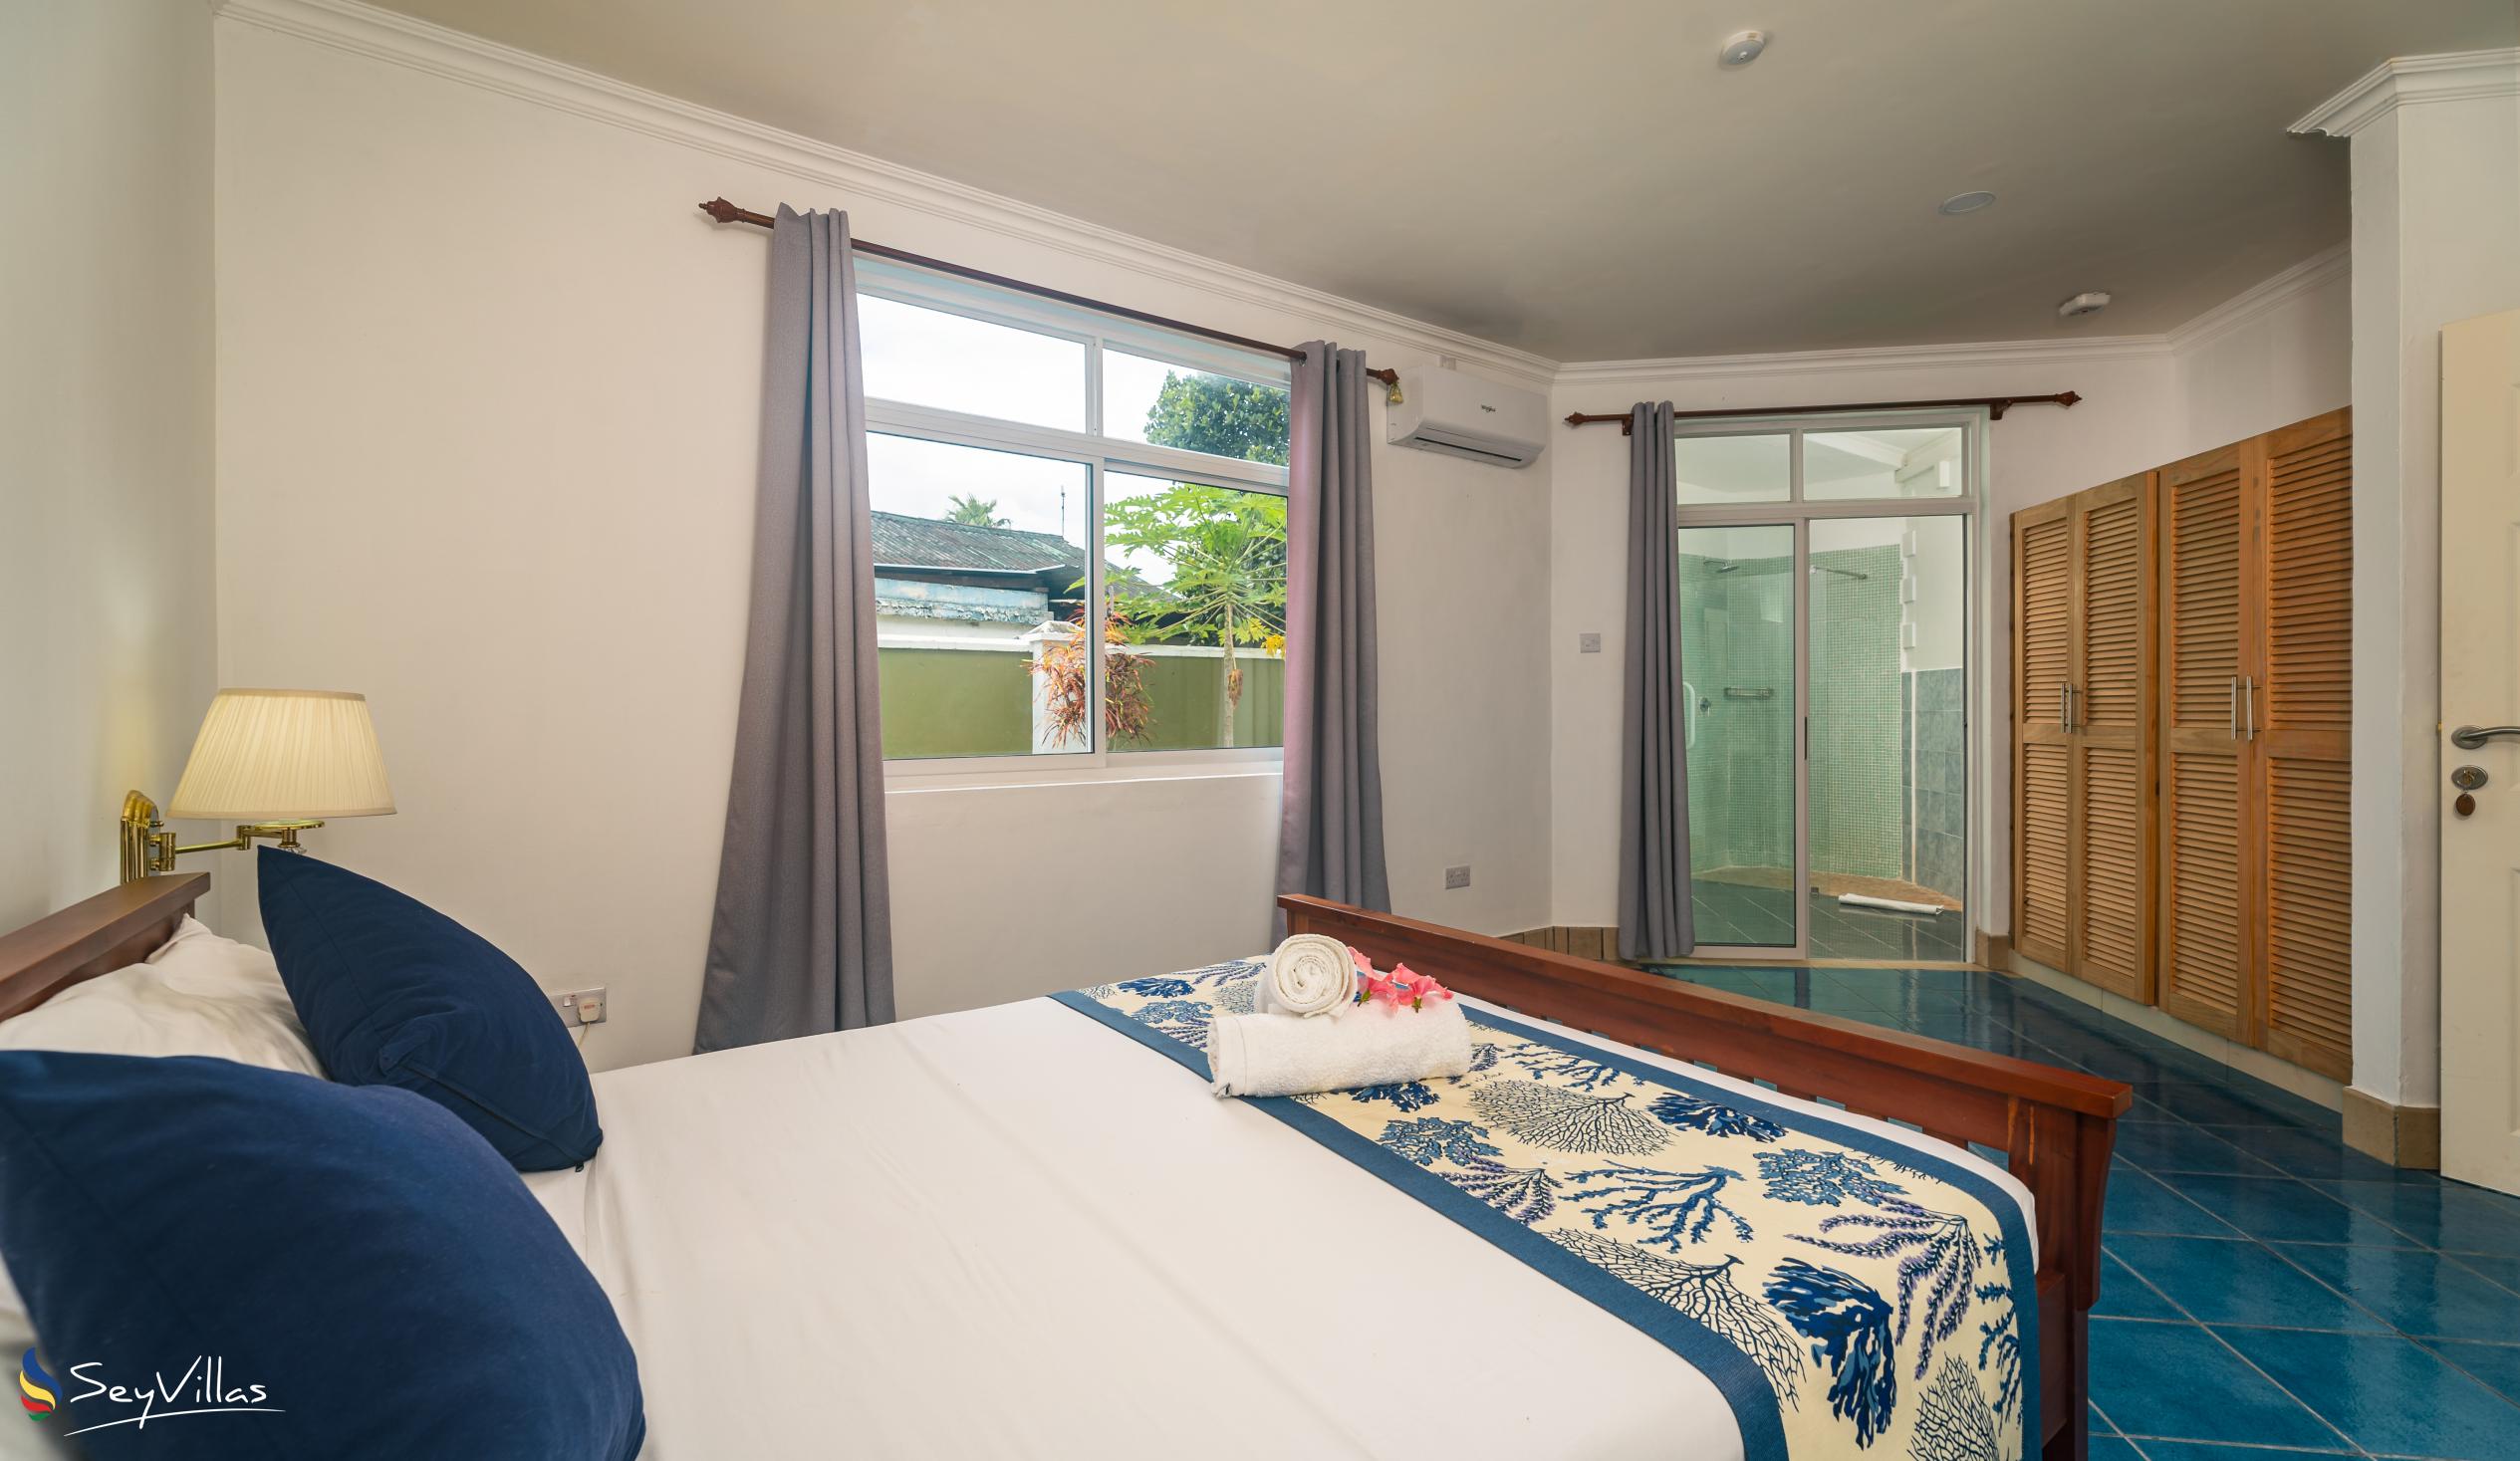 Photo 90: 340 Degrees Mountain View Apartments - Standard Double Room with Garden View - Mahé (Seychelles)